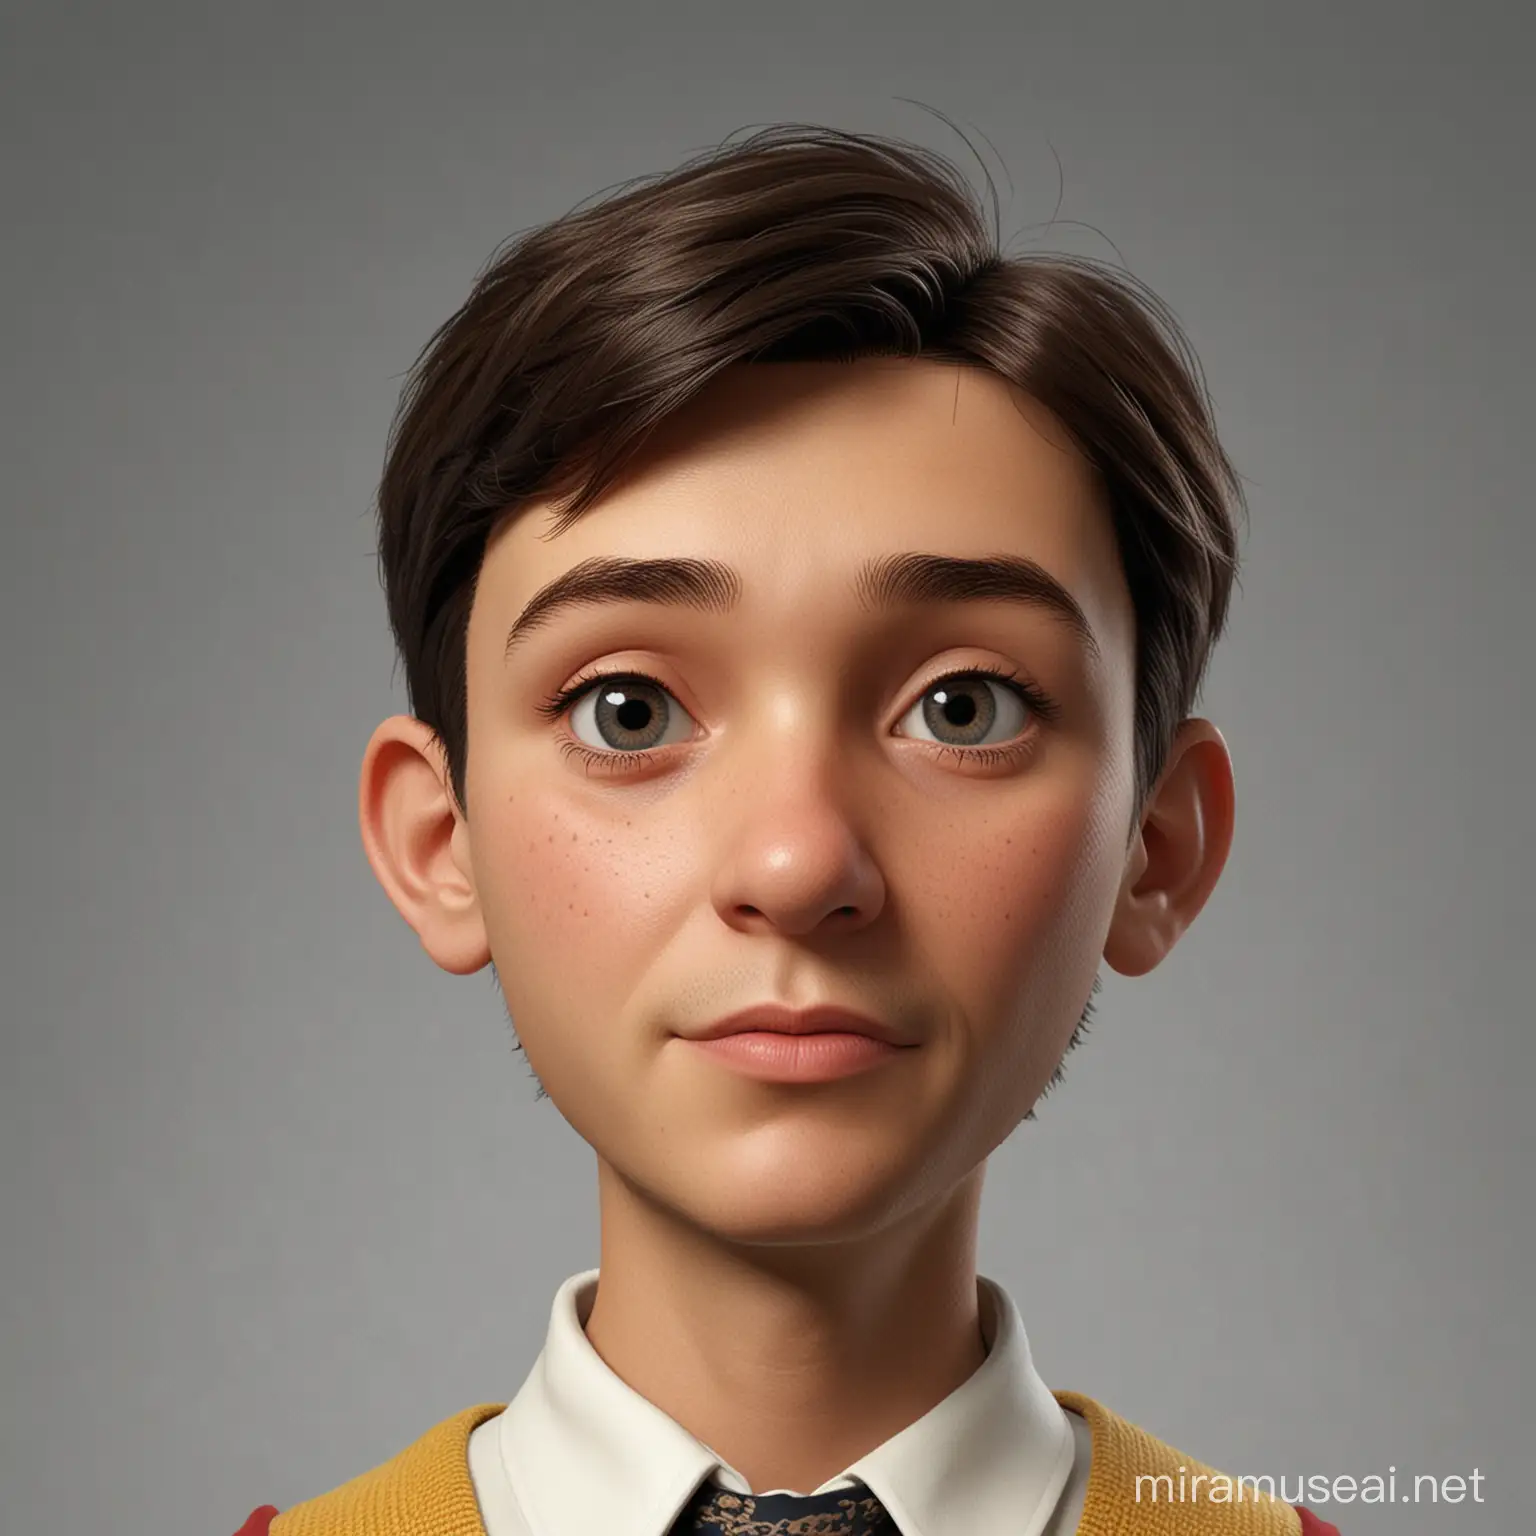 Realistic 3D Rendering of Pinocchio